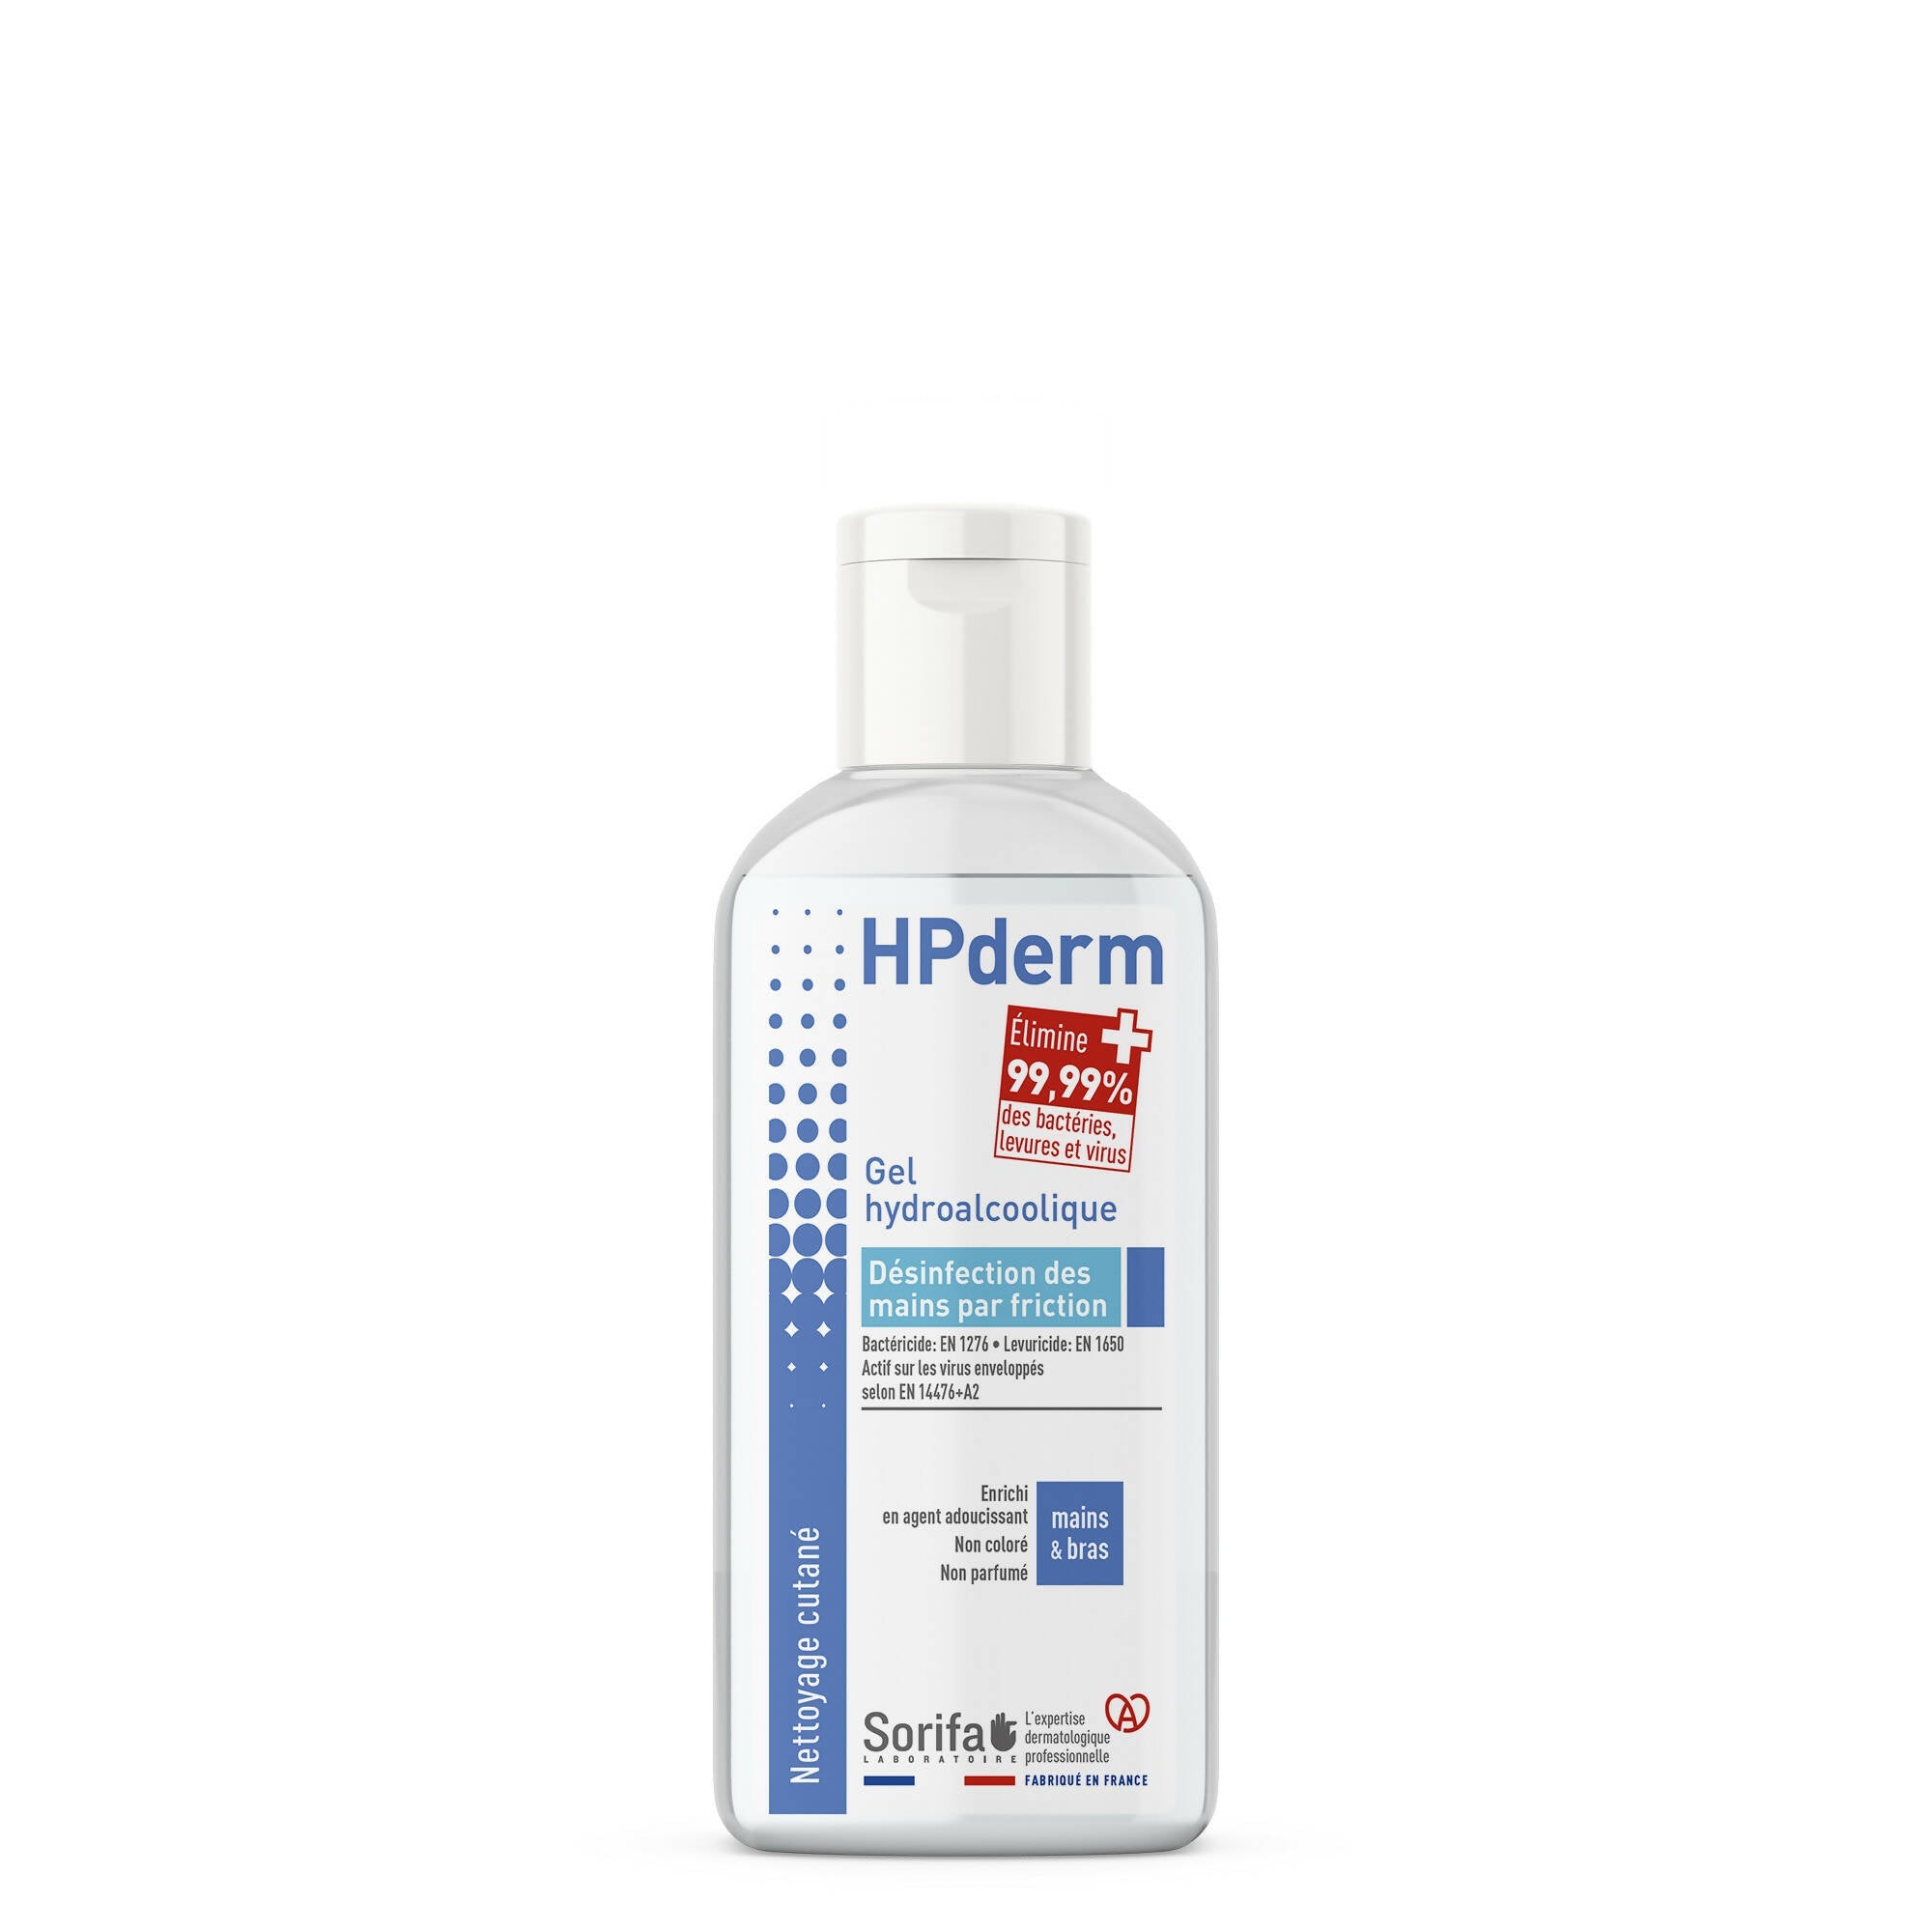 SORIFA - Pack of 5 - HPderm Hydroalcoholic gel for hand disinfection - 100 ml bottle - 0